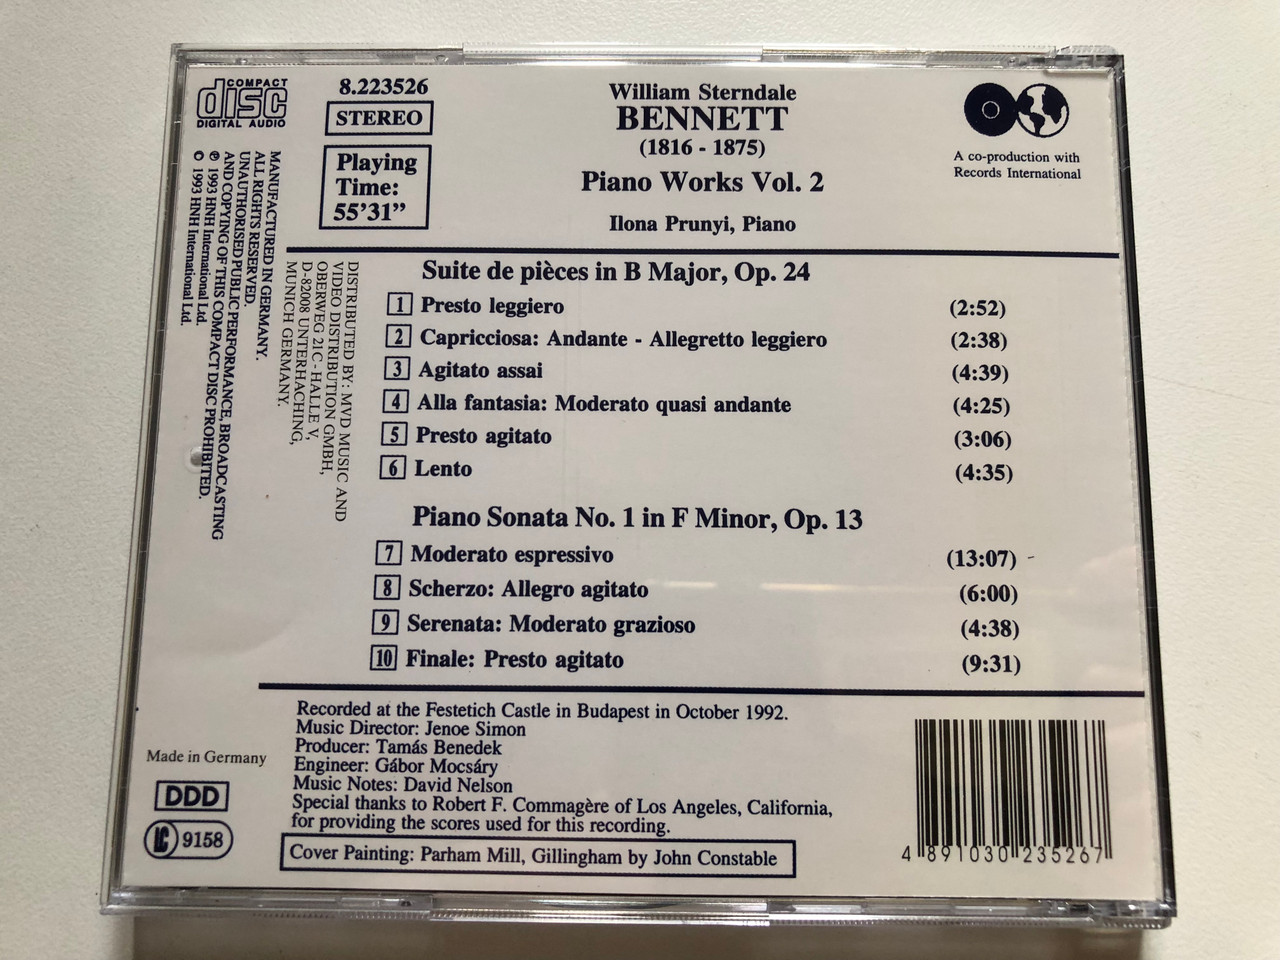 https://cdn10.bigcommerce.com/s-62bdpkt7pb/products/0/images/307016/William_Sterndale_Bennett_-_Piano_Works_Vol._2_Suite_De_Pices_Op._24_Piano_Sonata_No._1_Op._13_-_Ilona_Prunyi_piano_Marco_Polo_Audio_CD_1993_Stereo_8_2__85604.1698439093.1280.1280.JPG?c=2